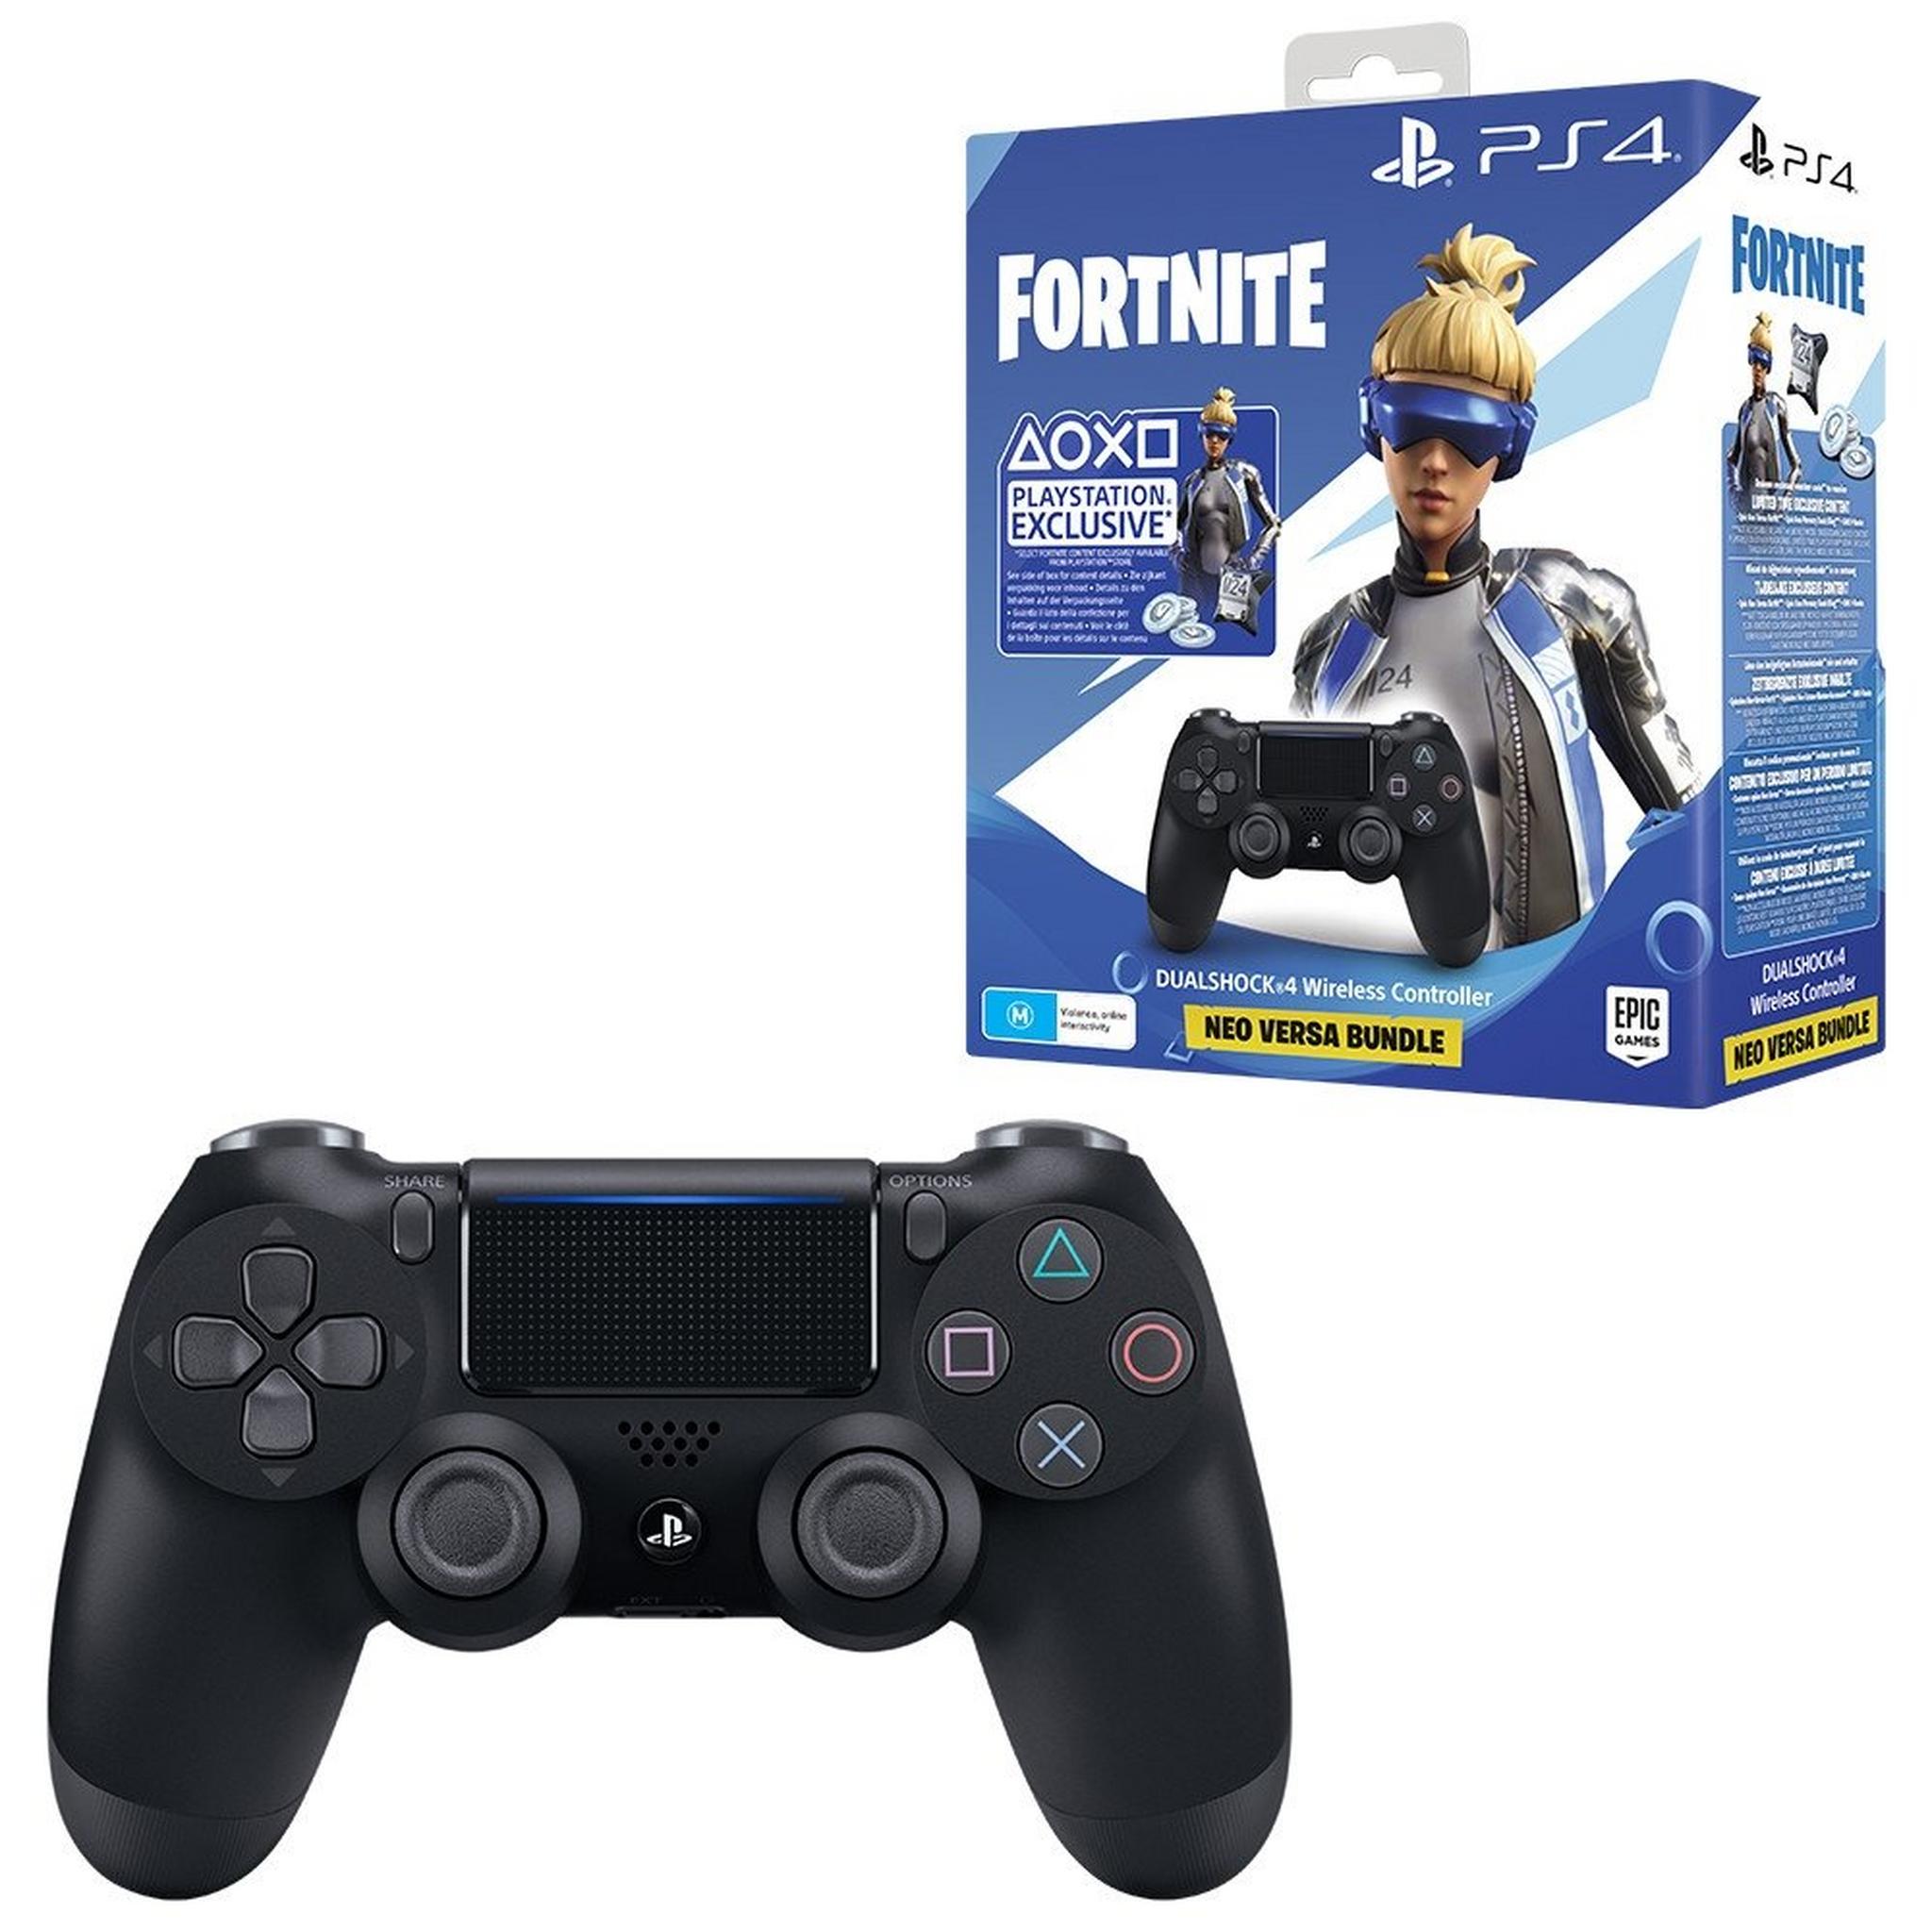 Sony PlayStation 4 DS4 Fortnite Neo Versa Wireless Controller + Crash Team Racing Nitro-Fueled - PlayStation 4 Game